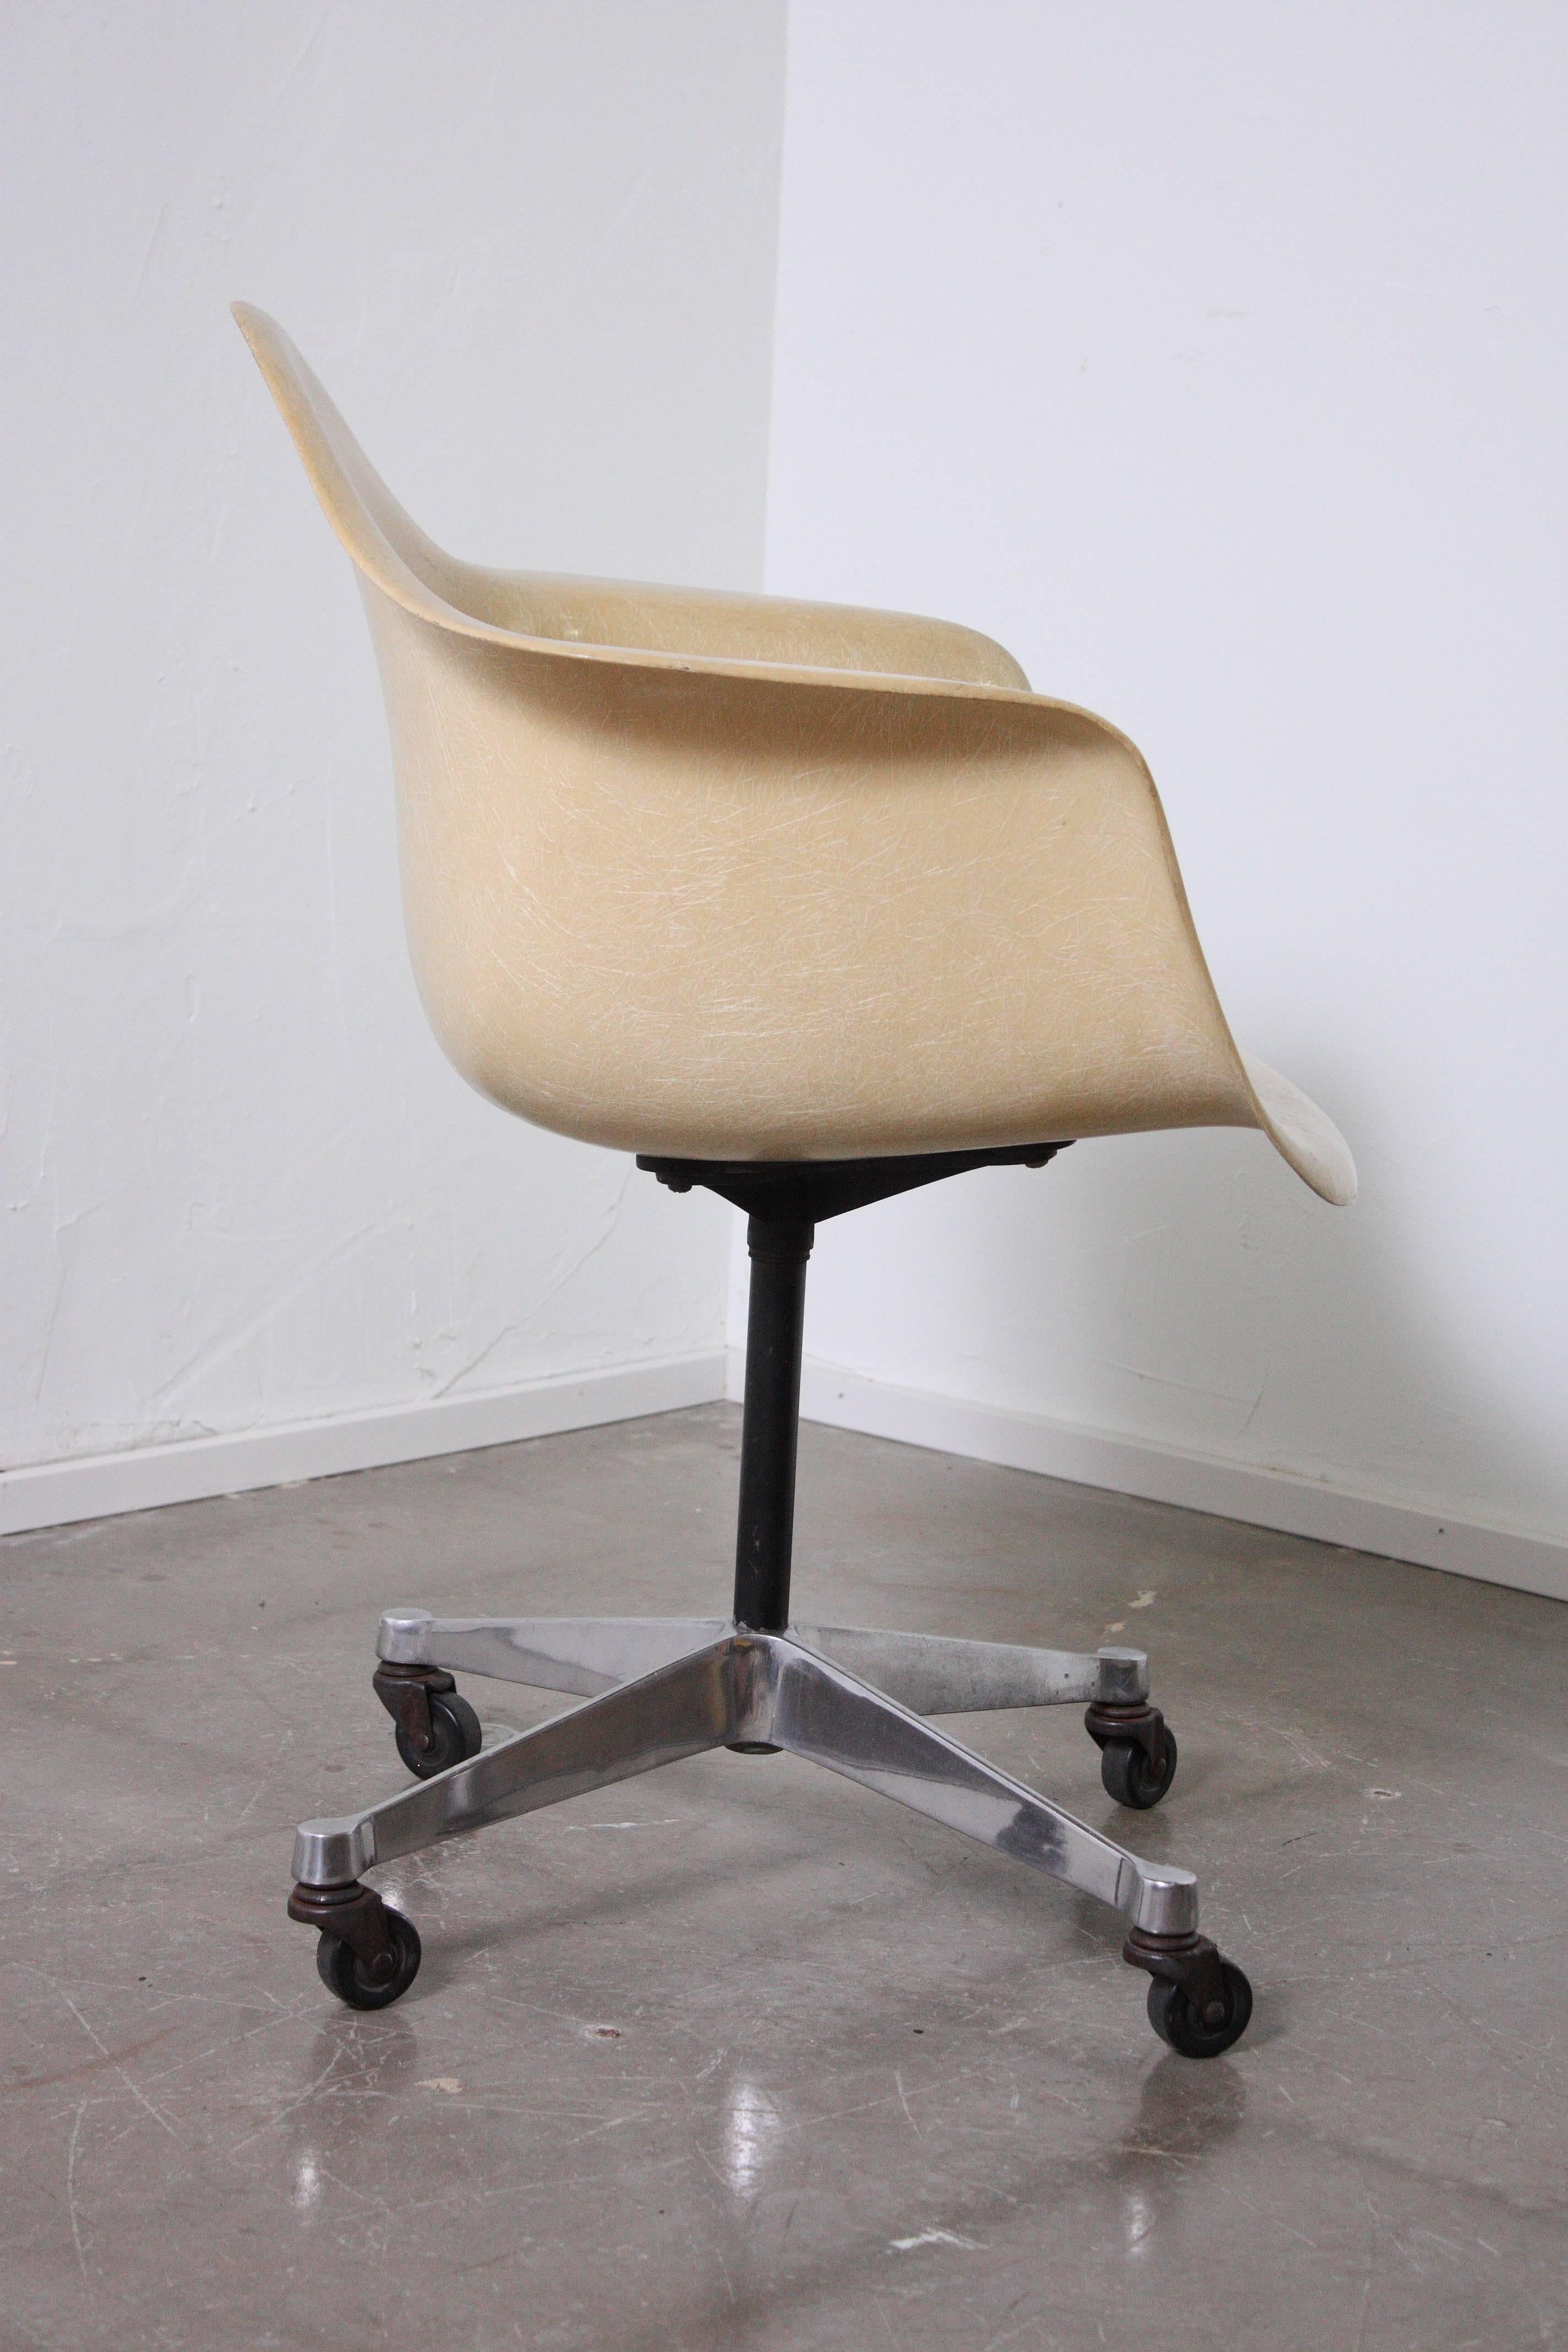 American Fiberglass Shell Chair by Charles and Ray Eames